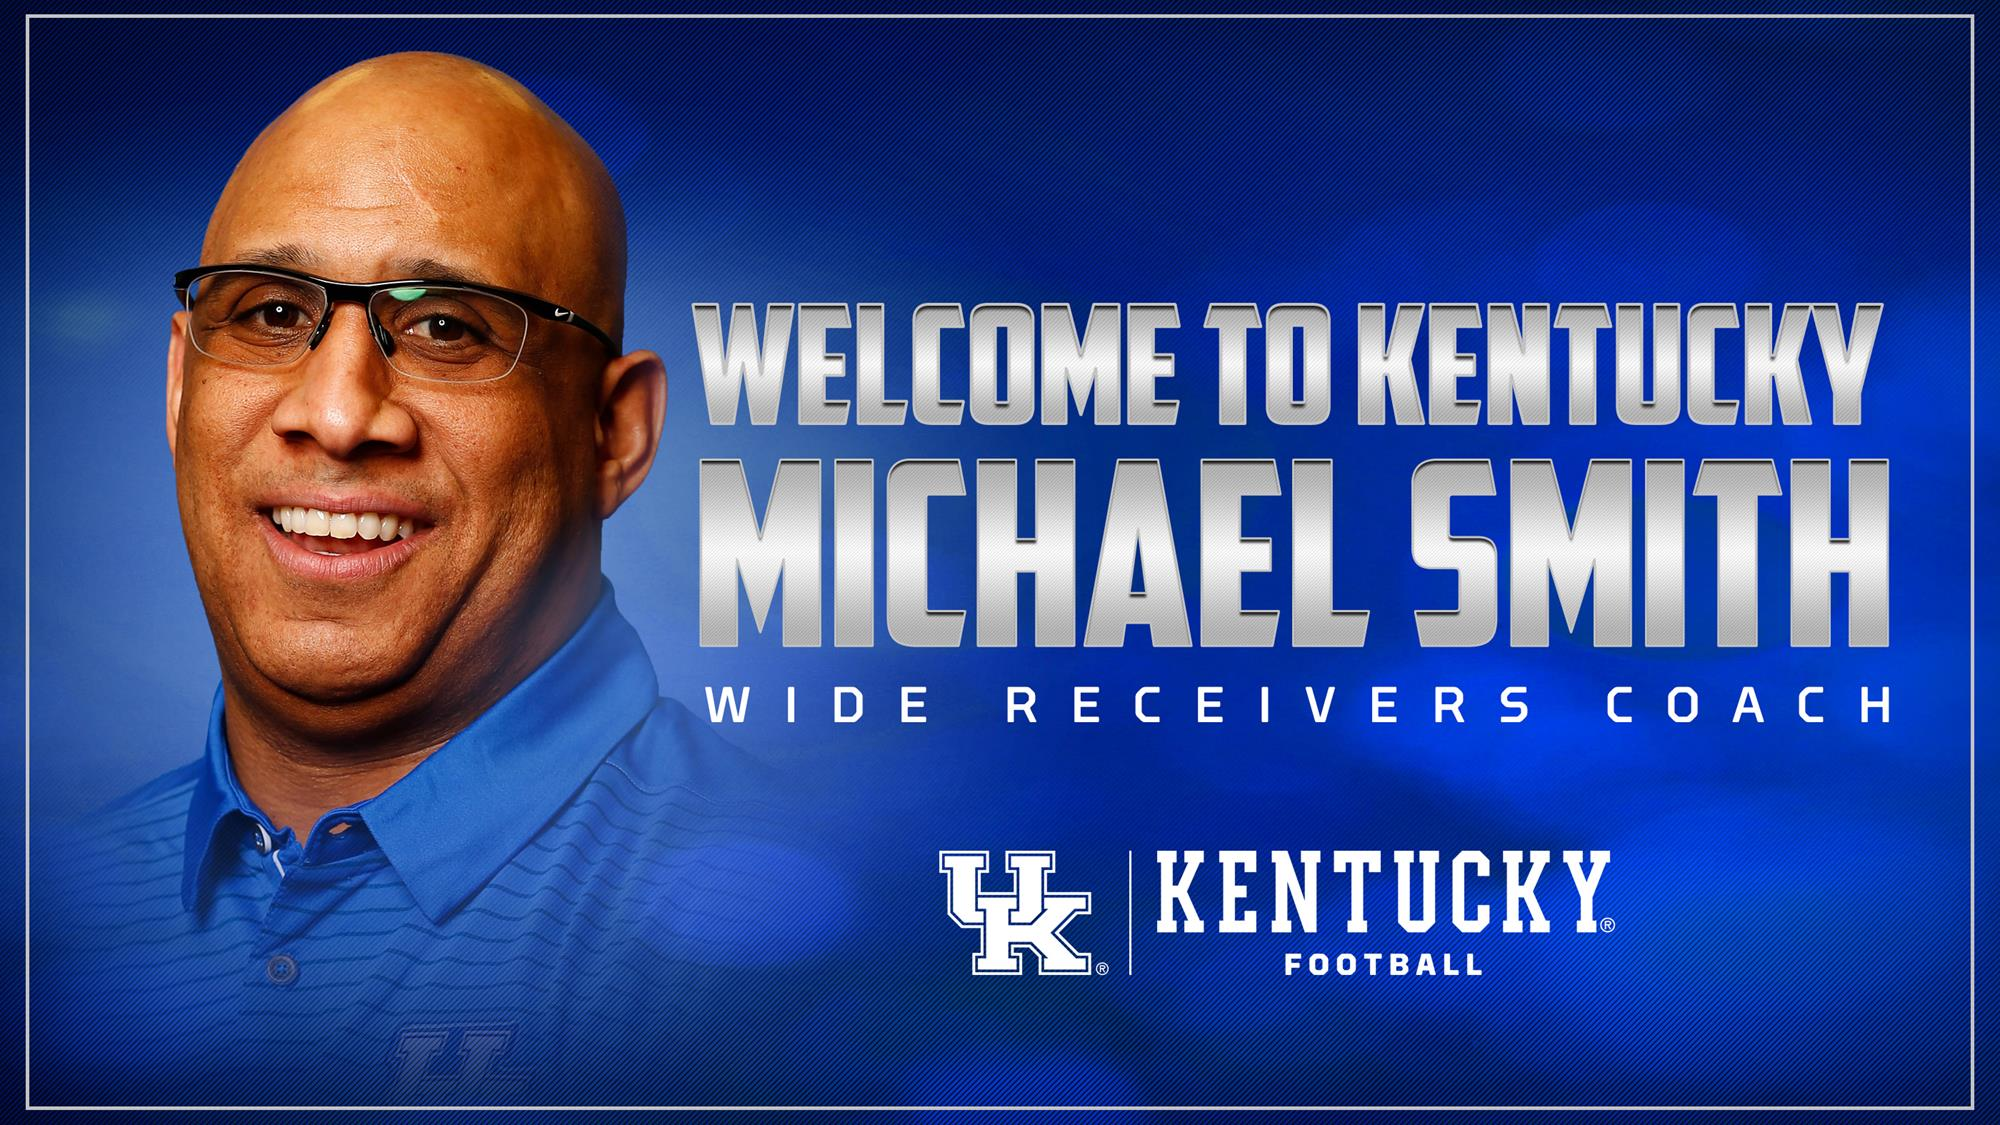 Michael Smith Named Wide Receivers Coach